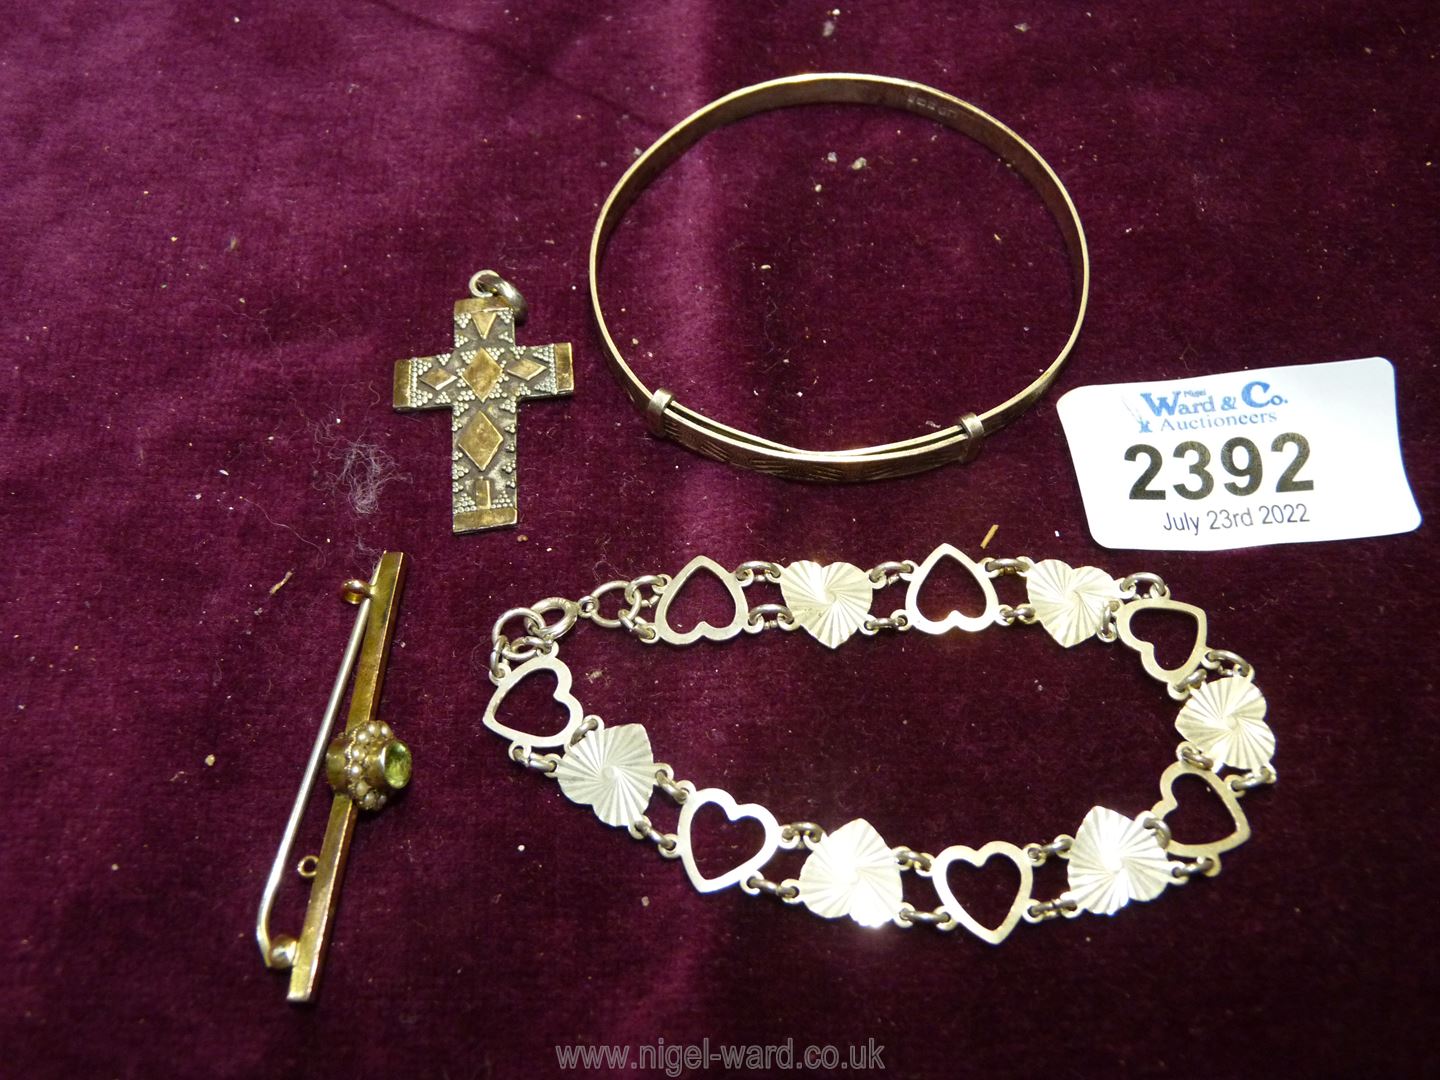 A 9ct gold bar brooch, silver christening bangle, crucifix and sterling silver hearts bracelet.